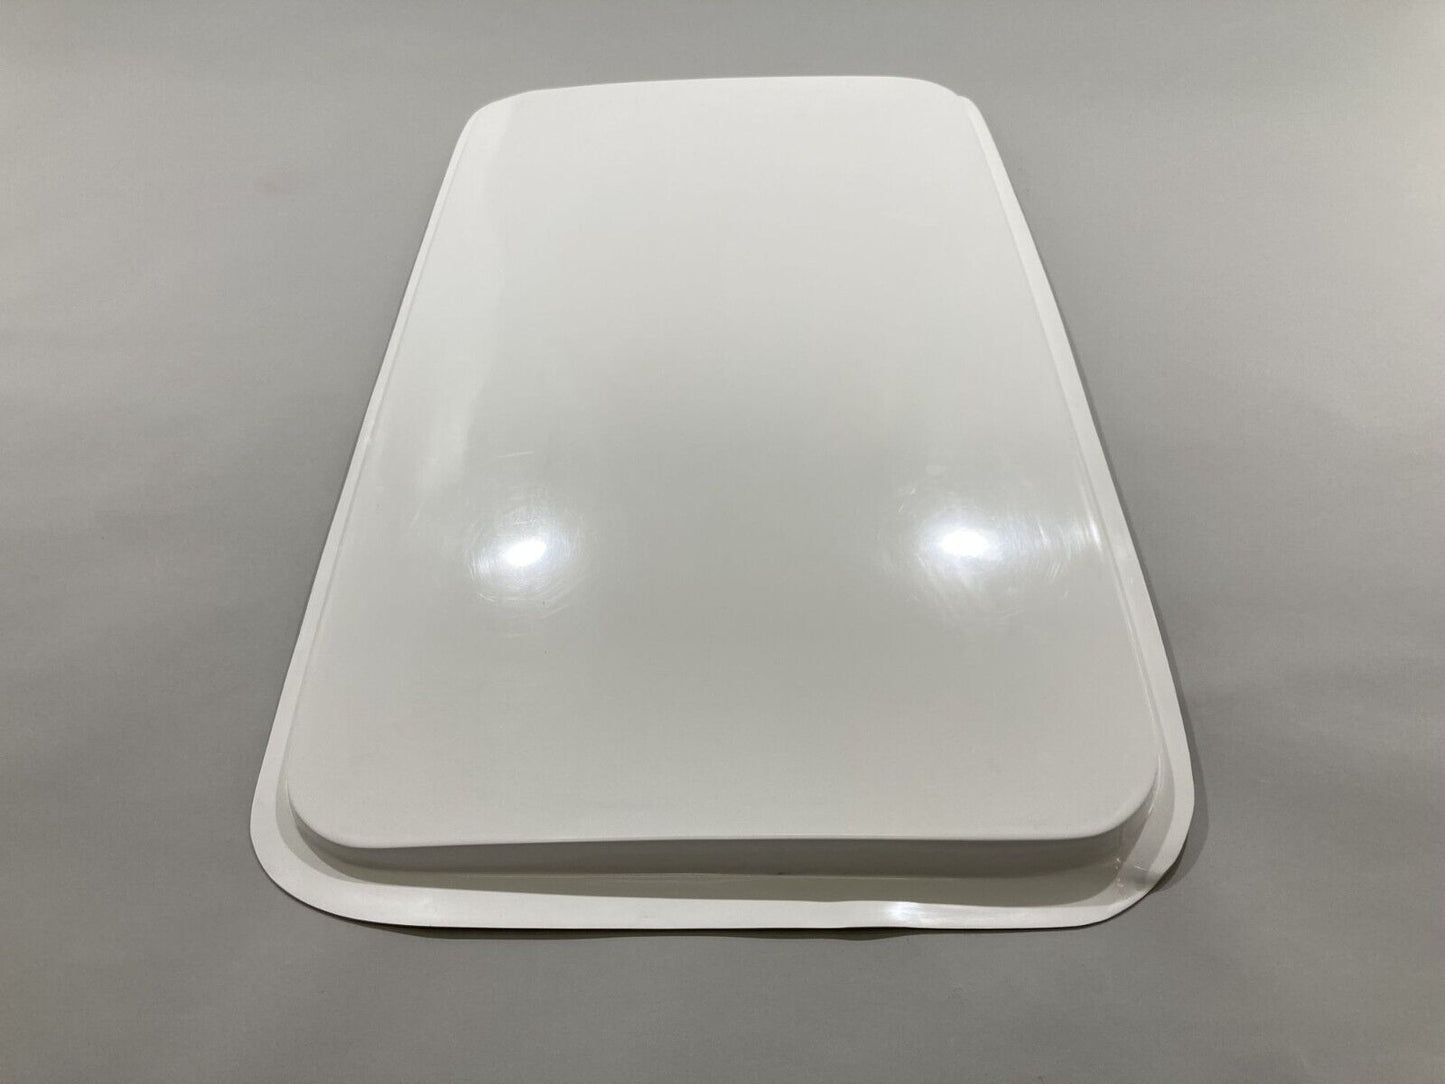 Sunroof Delete Fill Panel Replacement Cover (Fits BMW E90 E92 and M3)